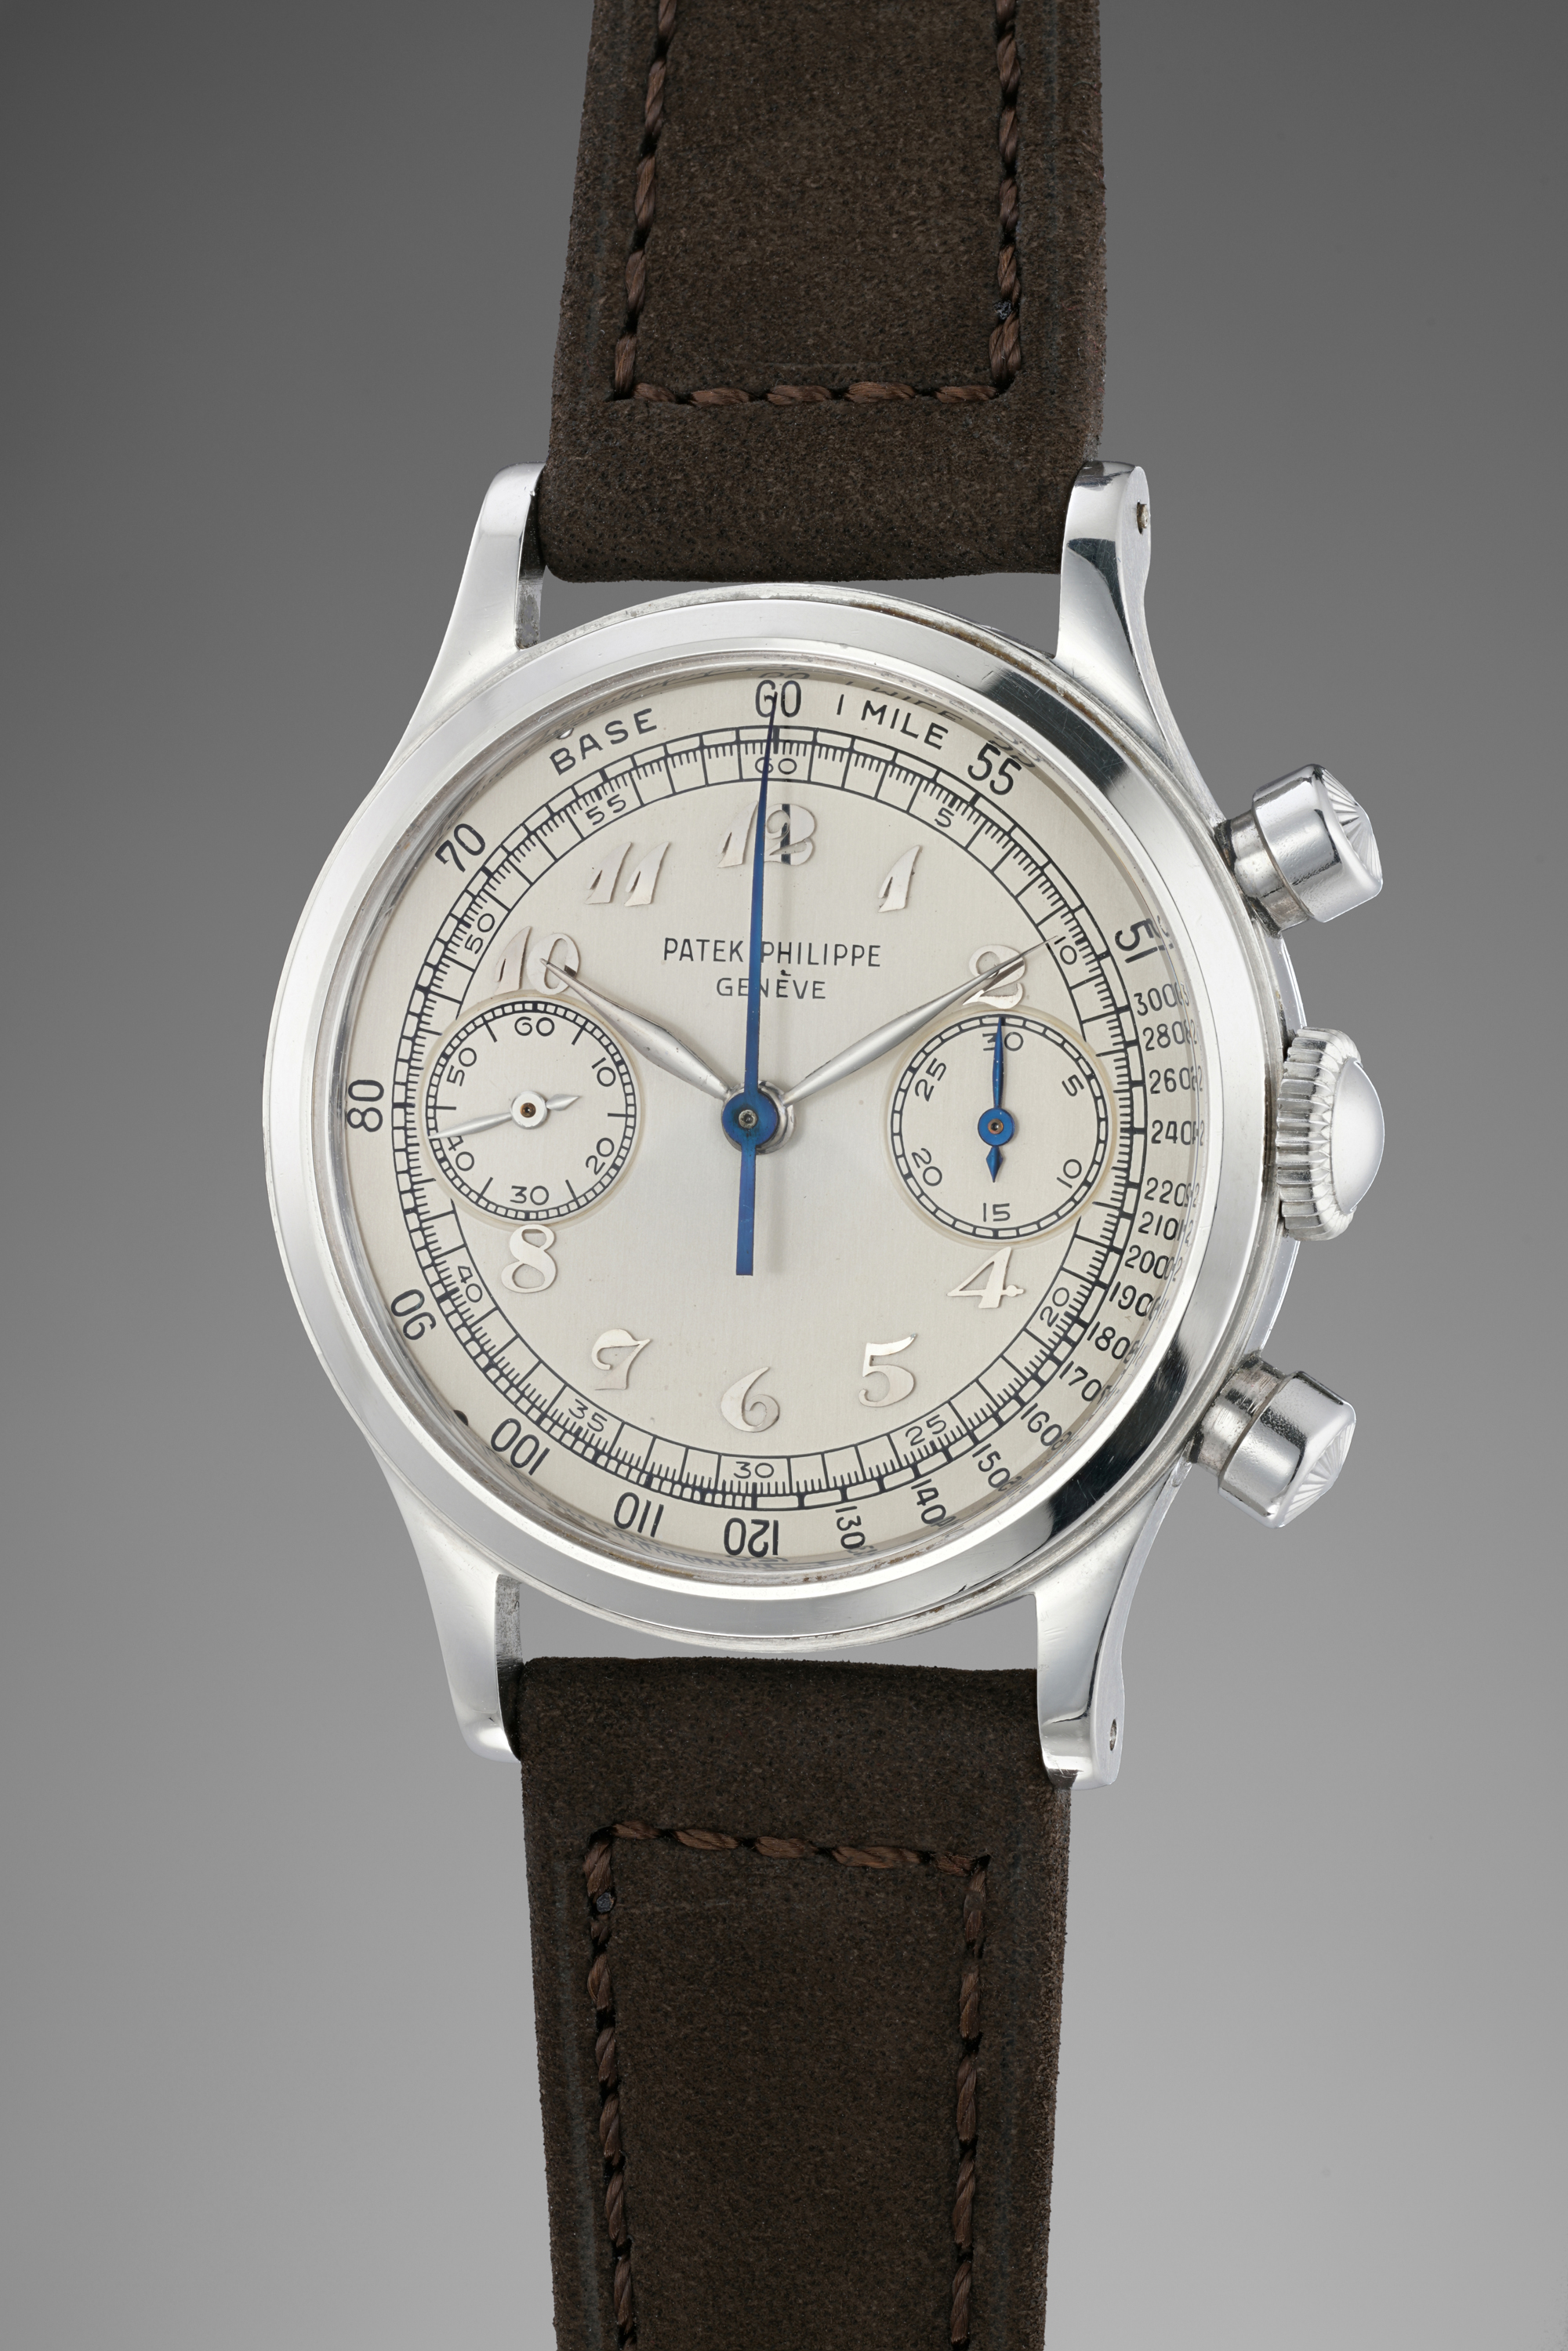 An extremely rare and incredibly well-preserved stainless-steel chronograph wristwatch with Breguet numerals calendar.